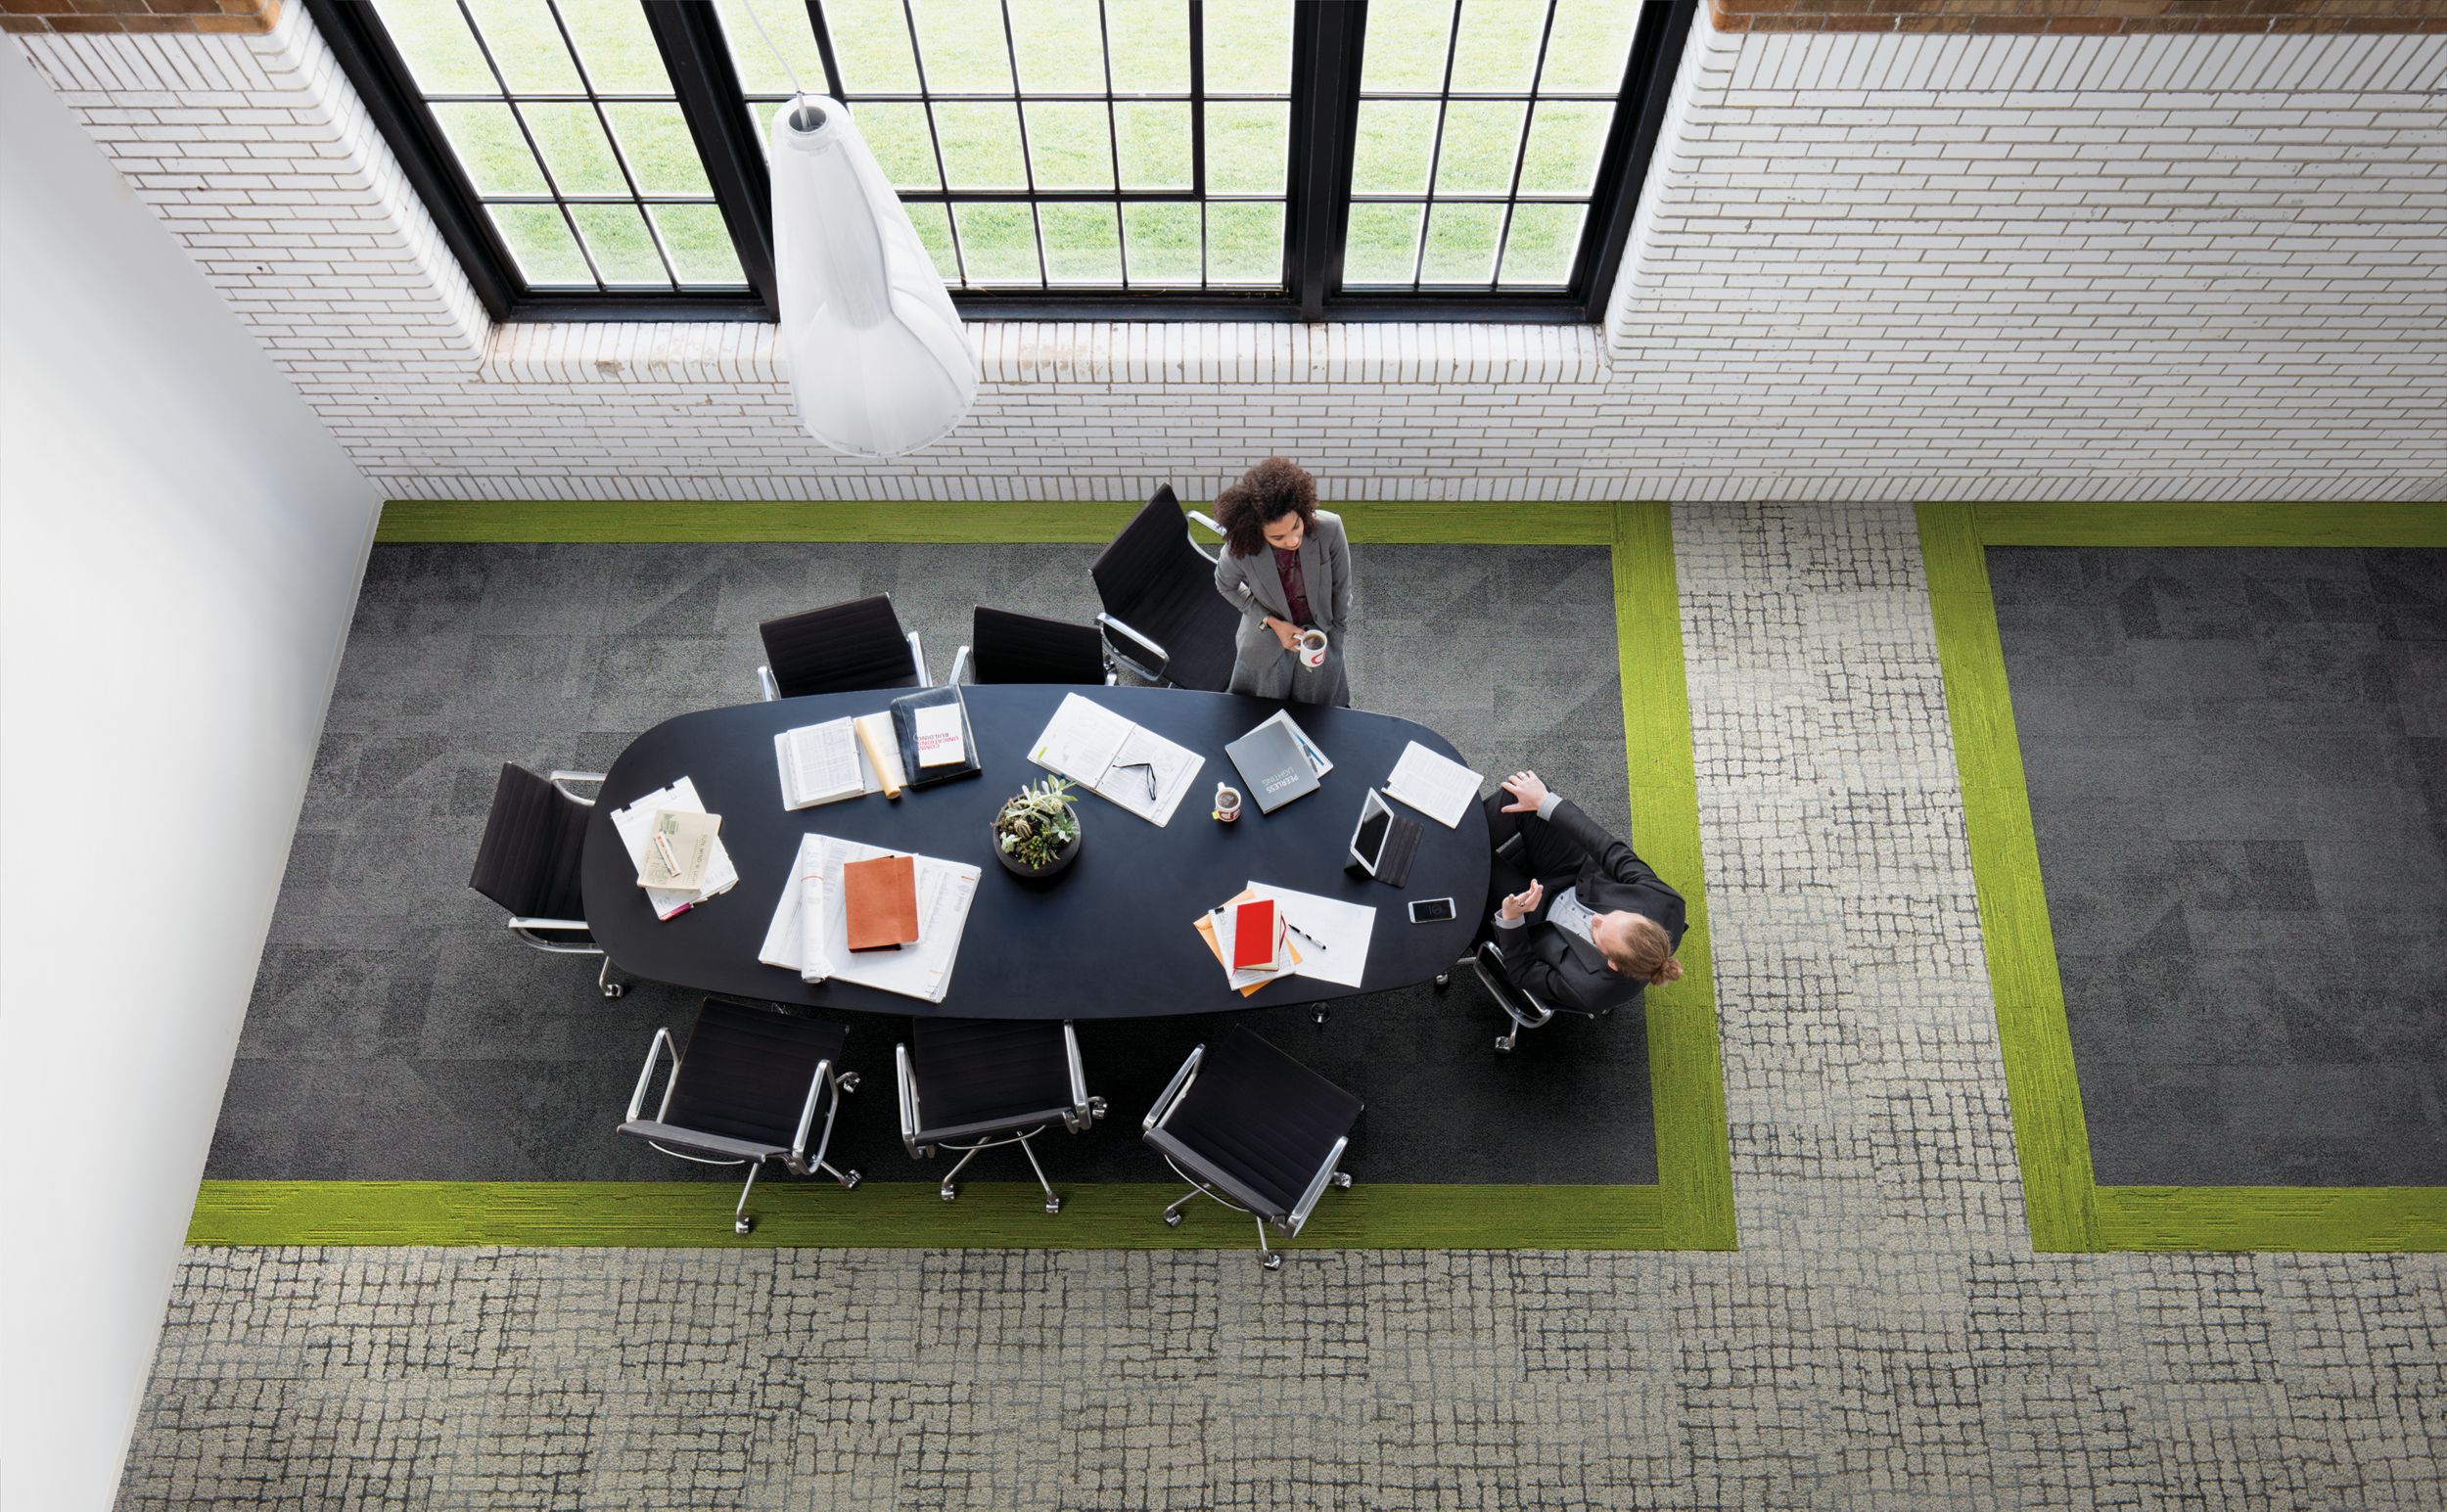 Interface Paver and Sett in Stone carpet tile with UR501 plank carpet tile in overhead view of meeting area with man and women conversating numéro d’image 3